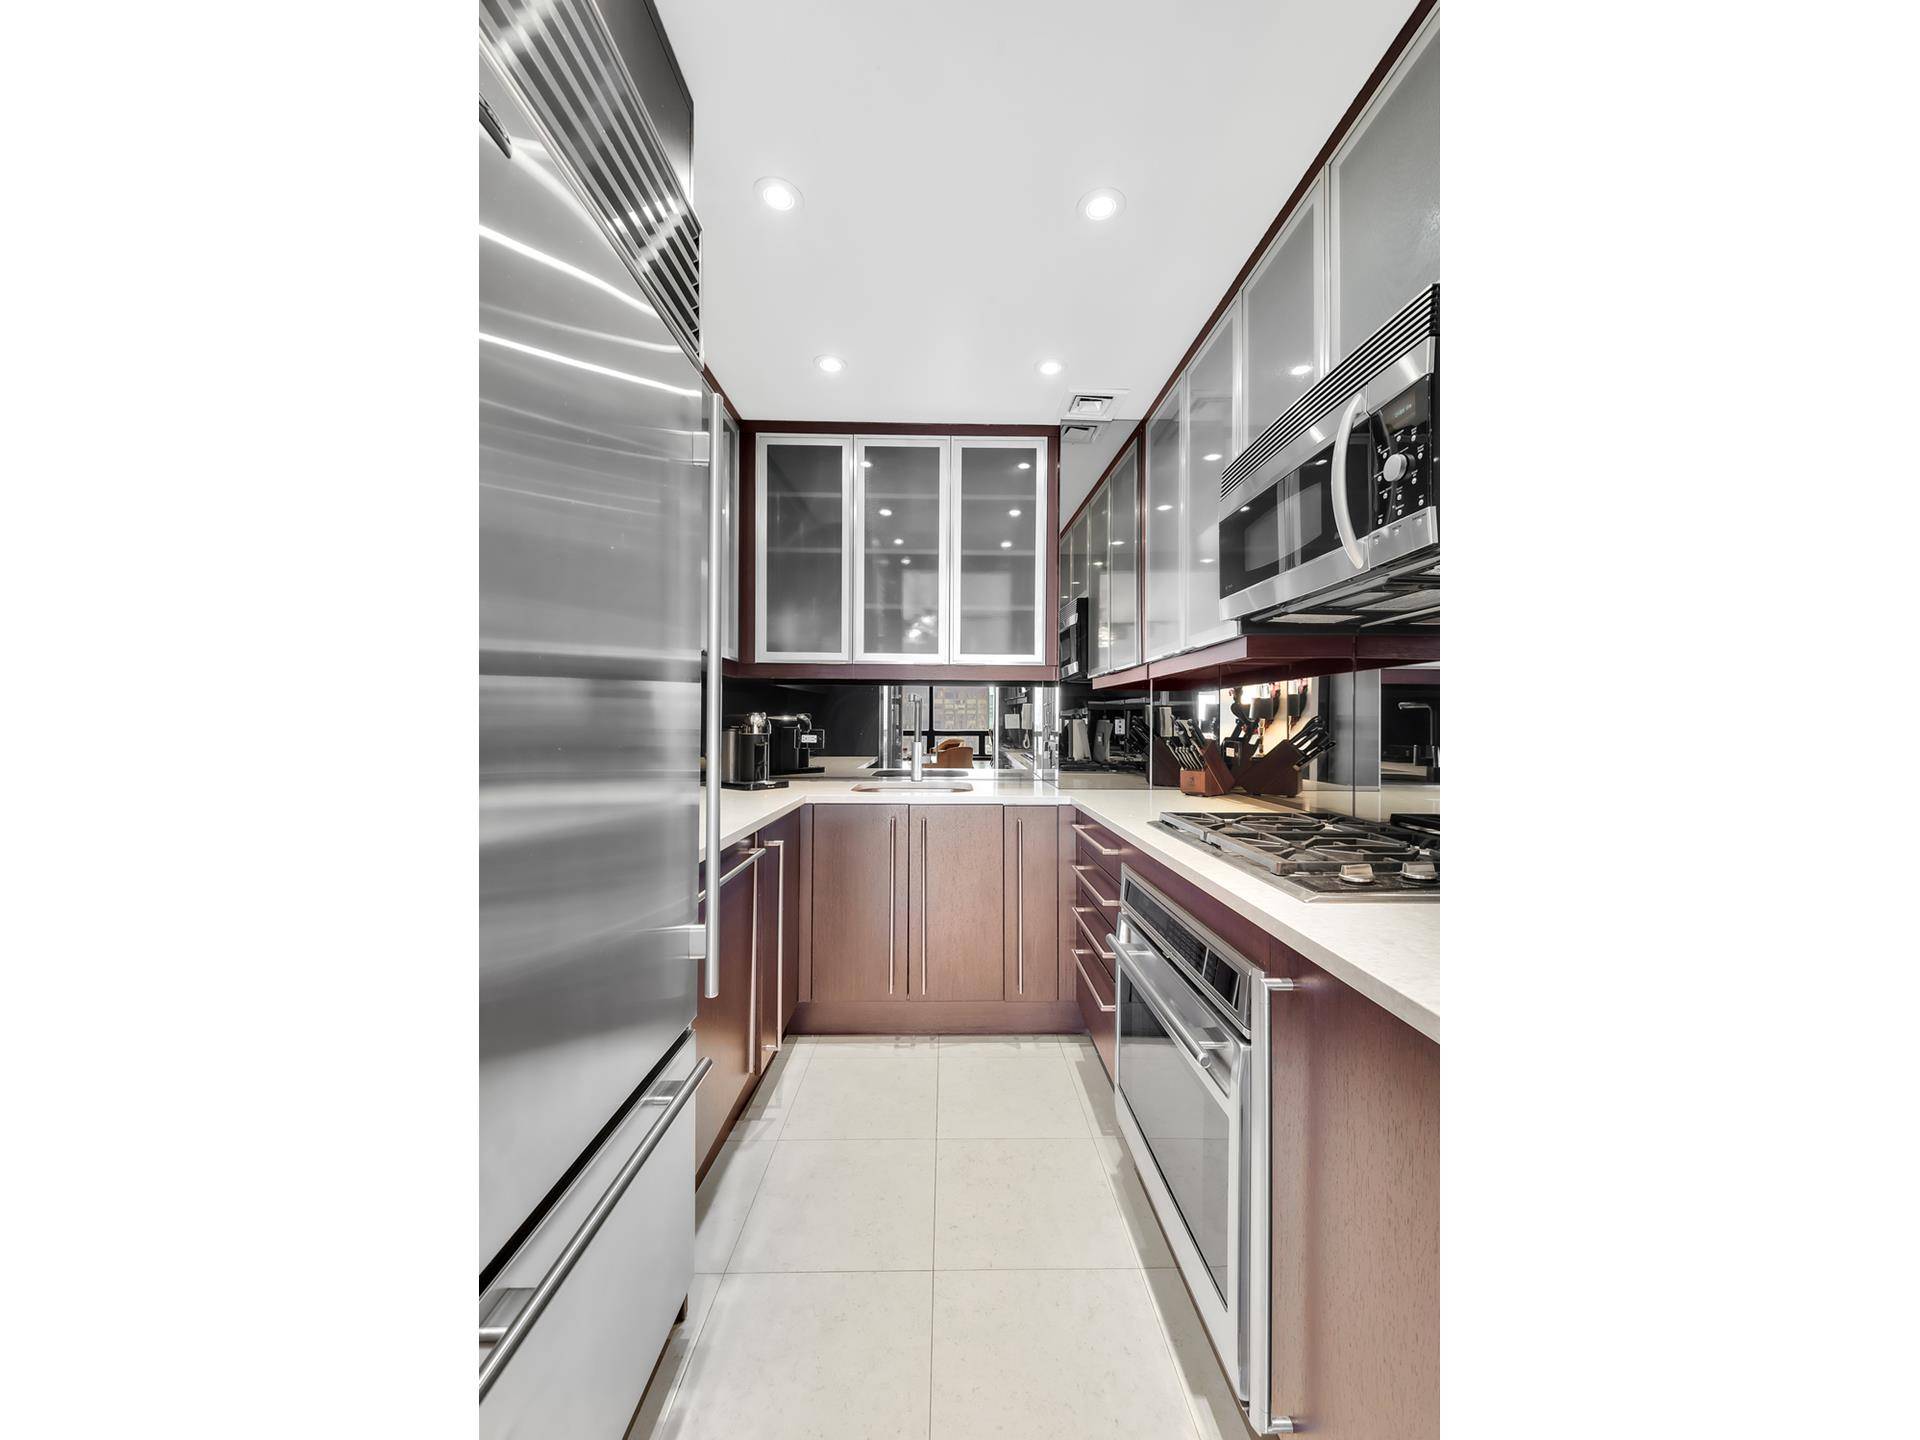 Situated just 2 blocks from Central Park on the 59th floor of a white glove, full service condominium, this corner 2 bedroom, 2 bath residence spares no detail and defines ...